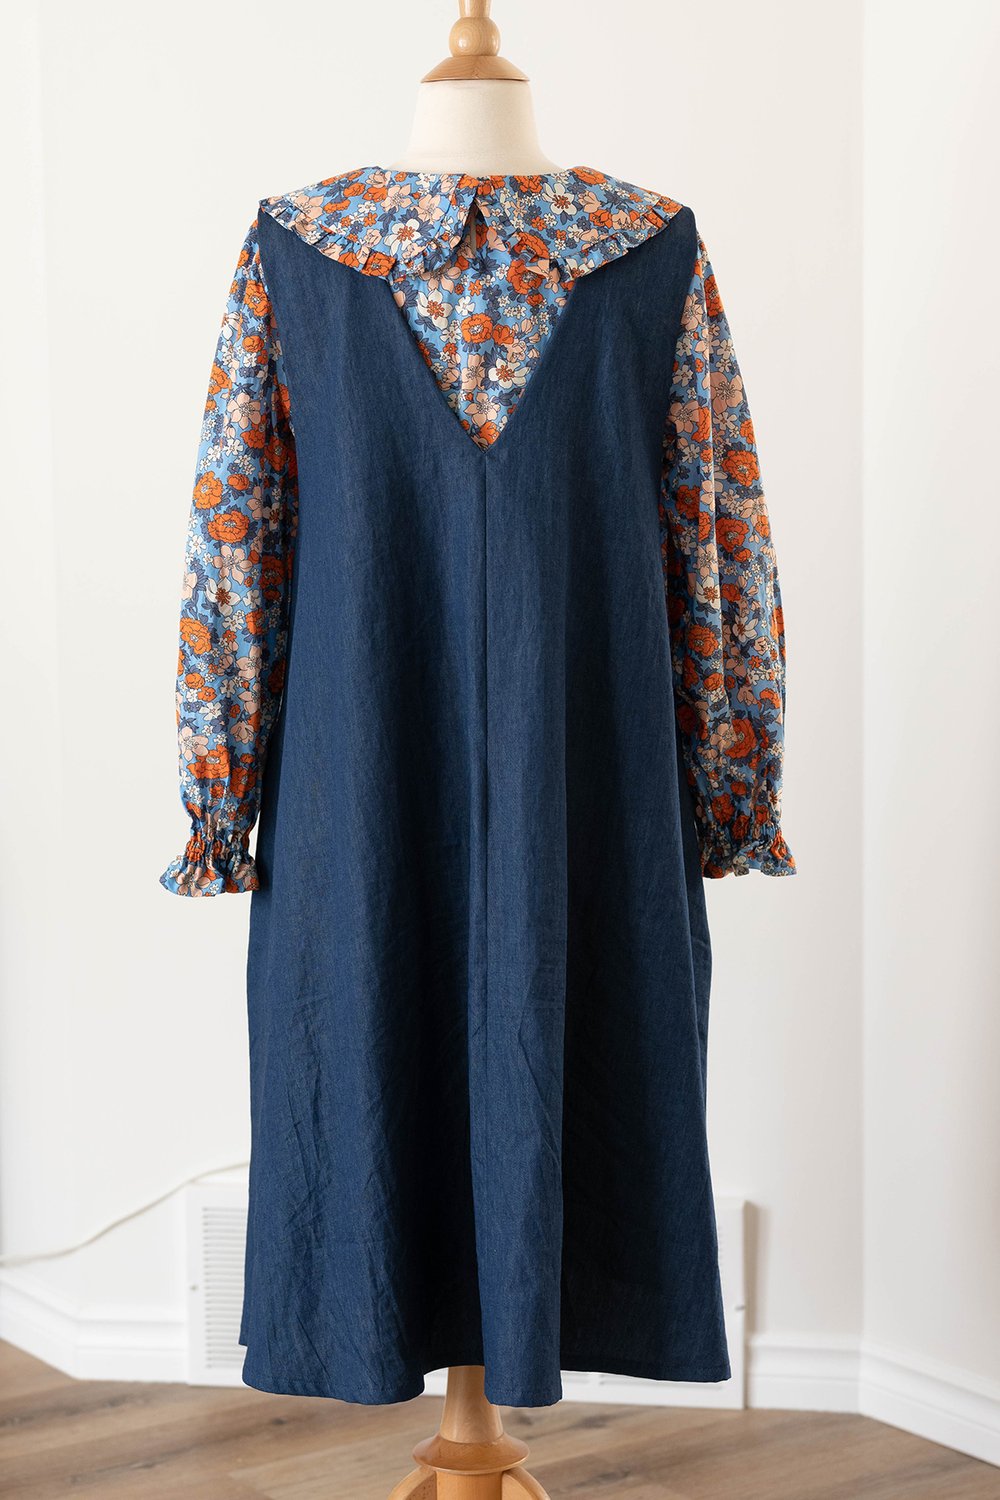 Denim pinafore and a floral top with big collars